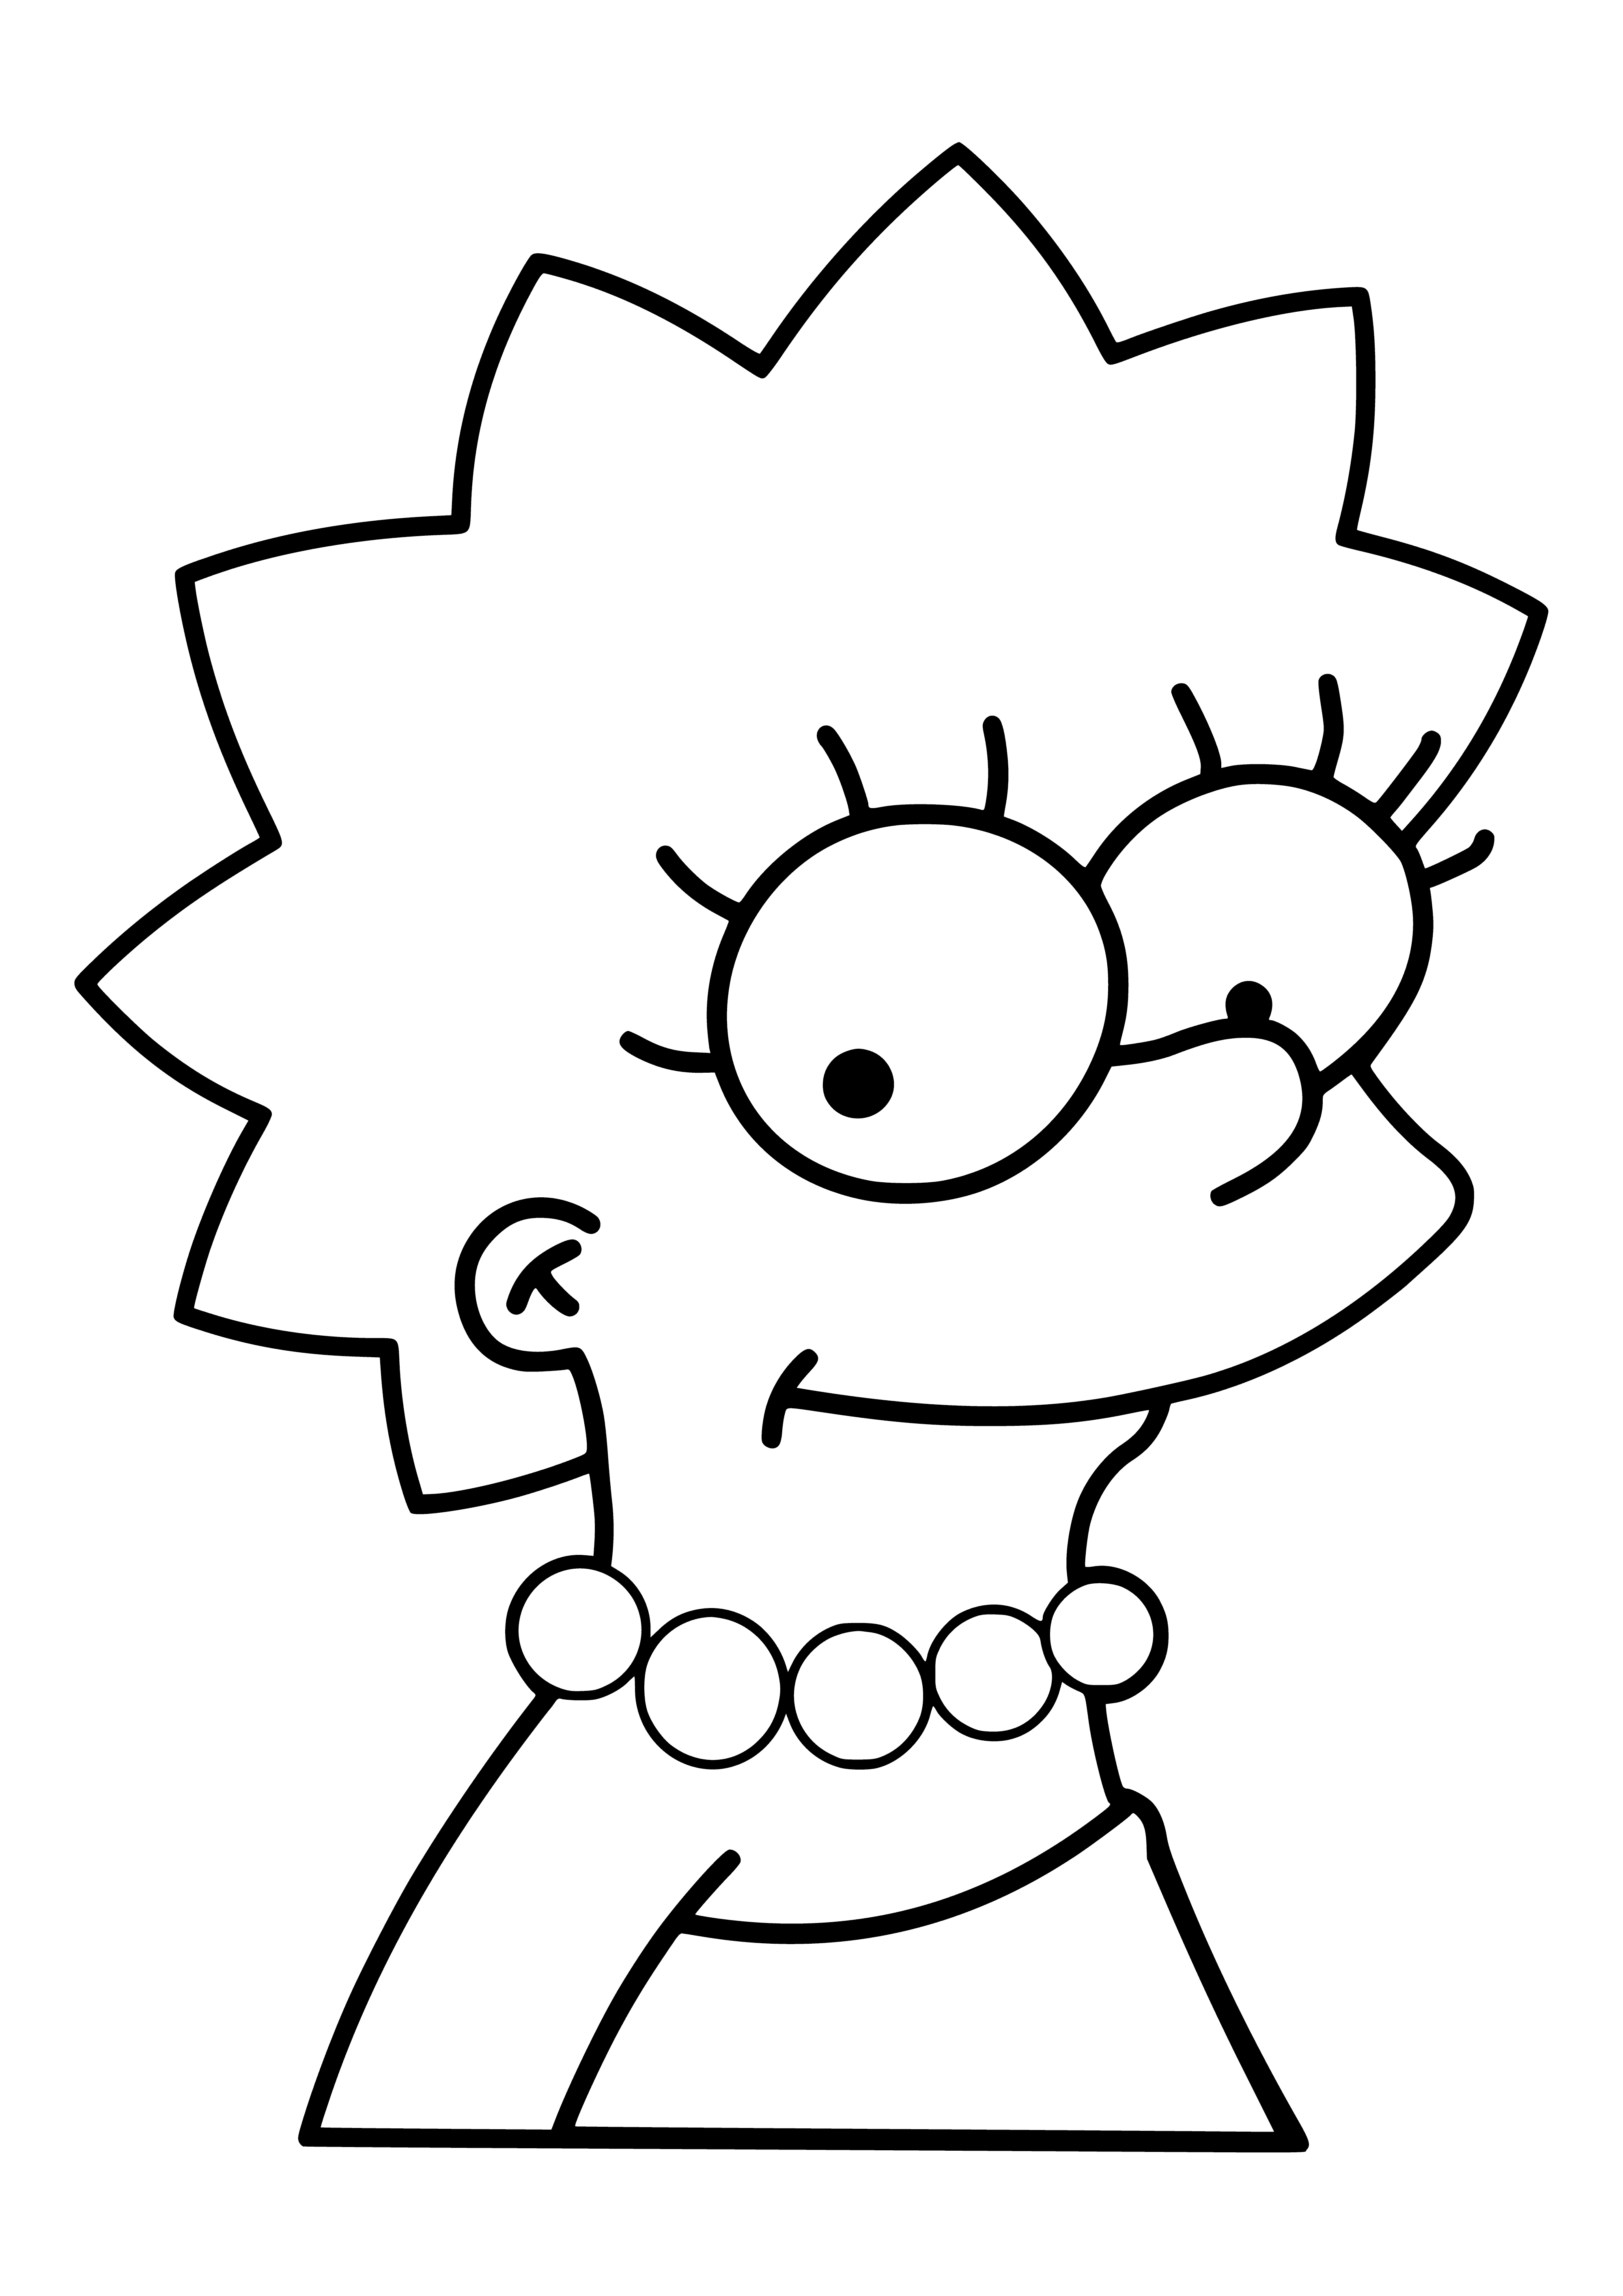 coloring page: Lisa Simpson, 8yo middle child of Homer & Marge, is a gifted student passionate abt her interests, inc. school & saxophone, vegetarian & feminist.